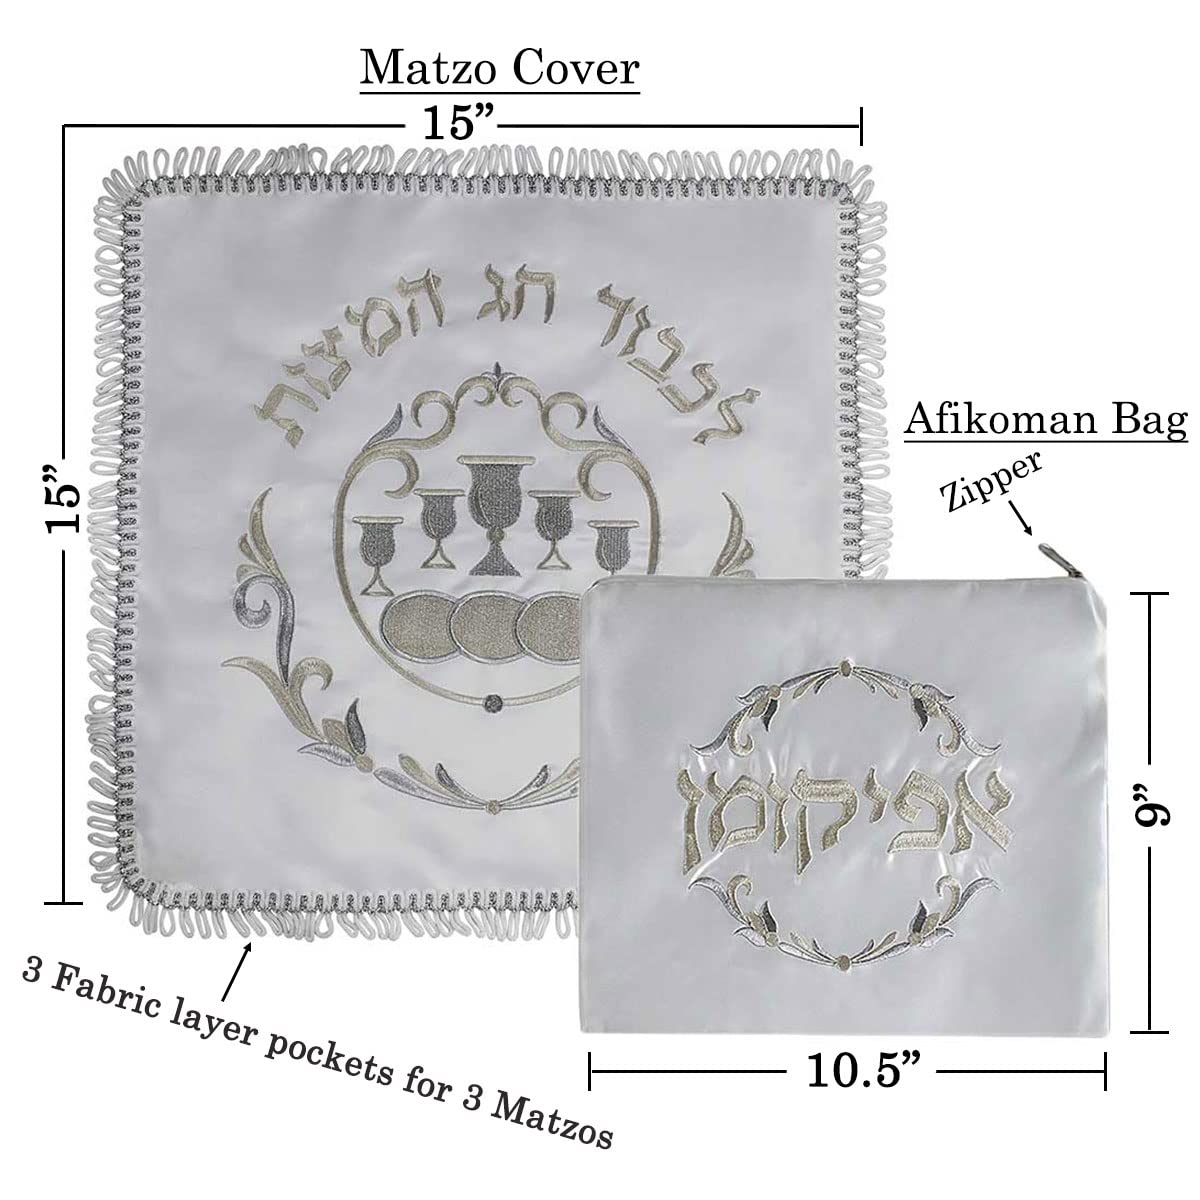 Passover Seder Complete Set Hammered Vienna Collection - Includes Seder Plate, Matzah Tray, Elijah Cup with Saucer, Kiddush Cup, Square Matzo Cover & Afikoman Bag Passover decorations By Zion Judaica